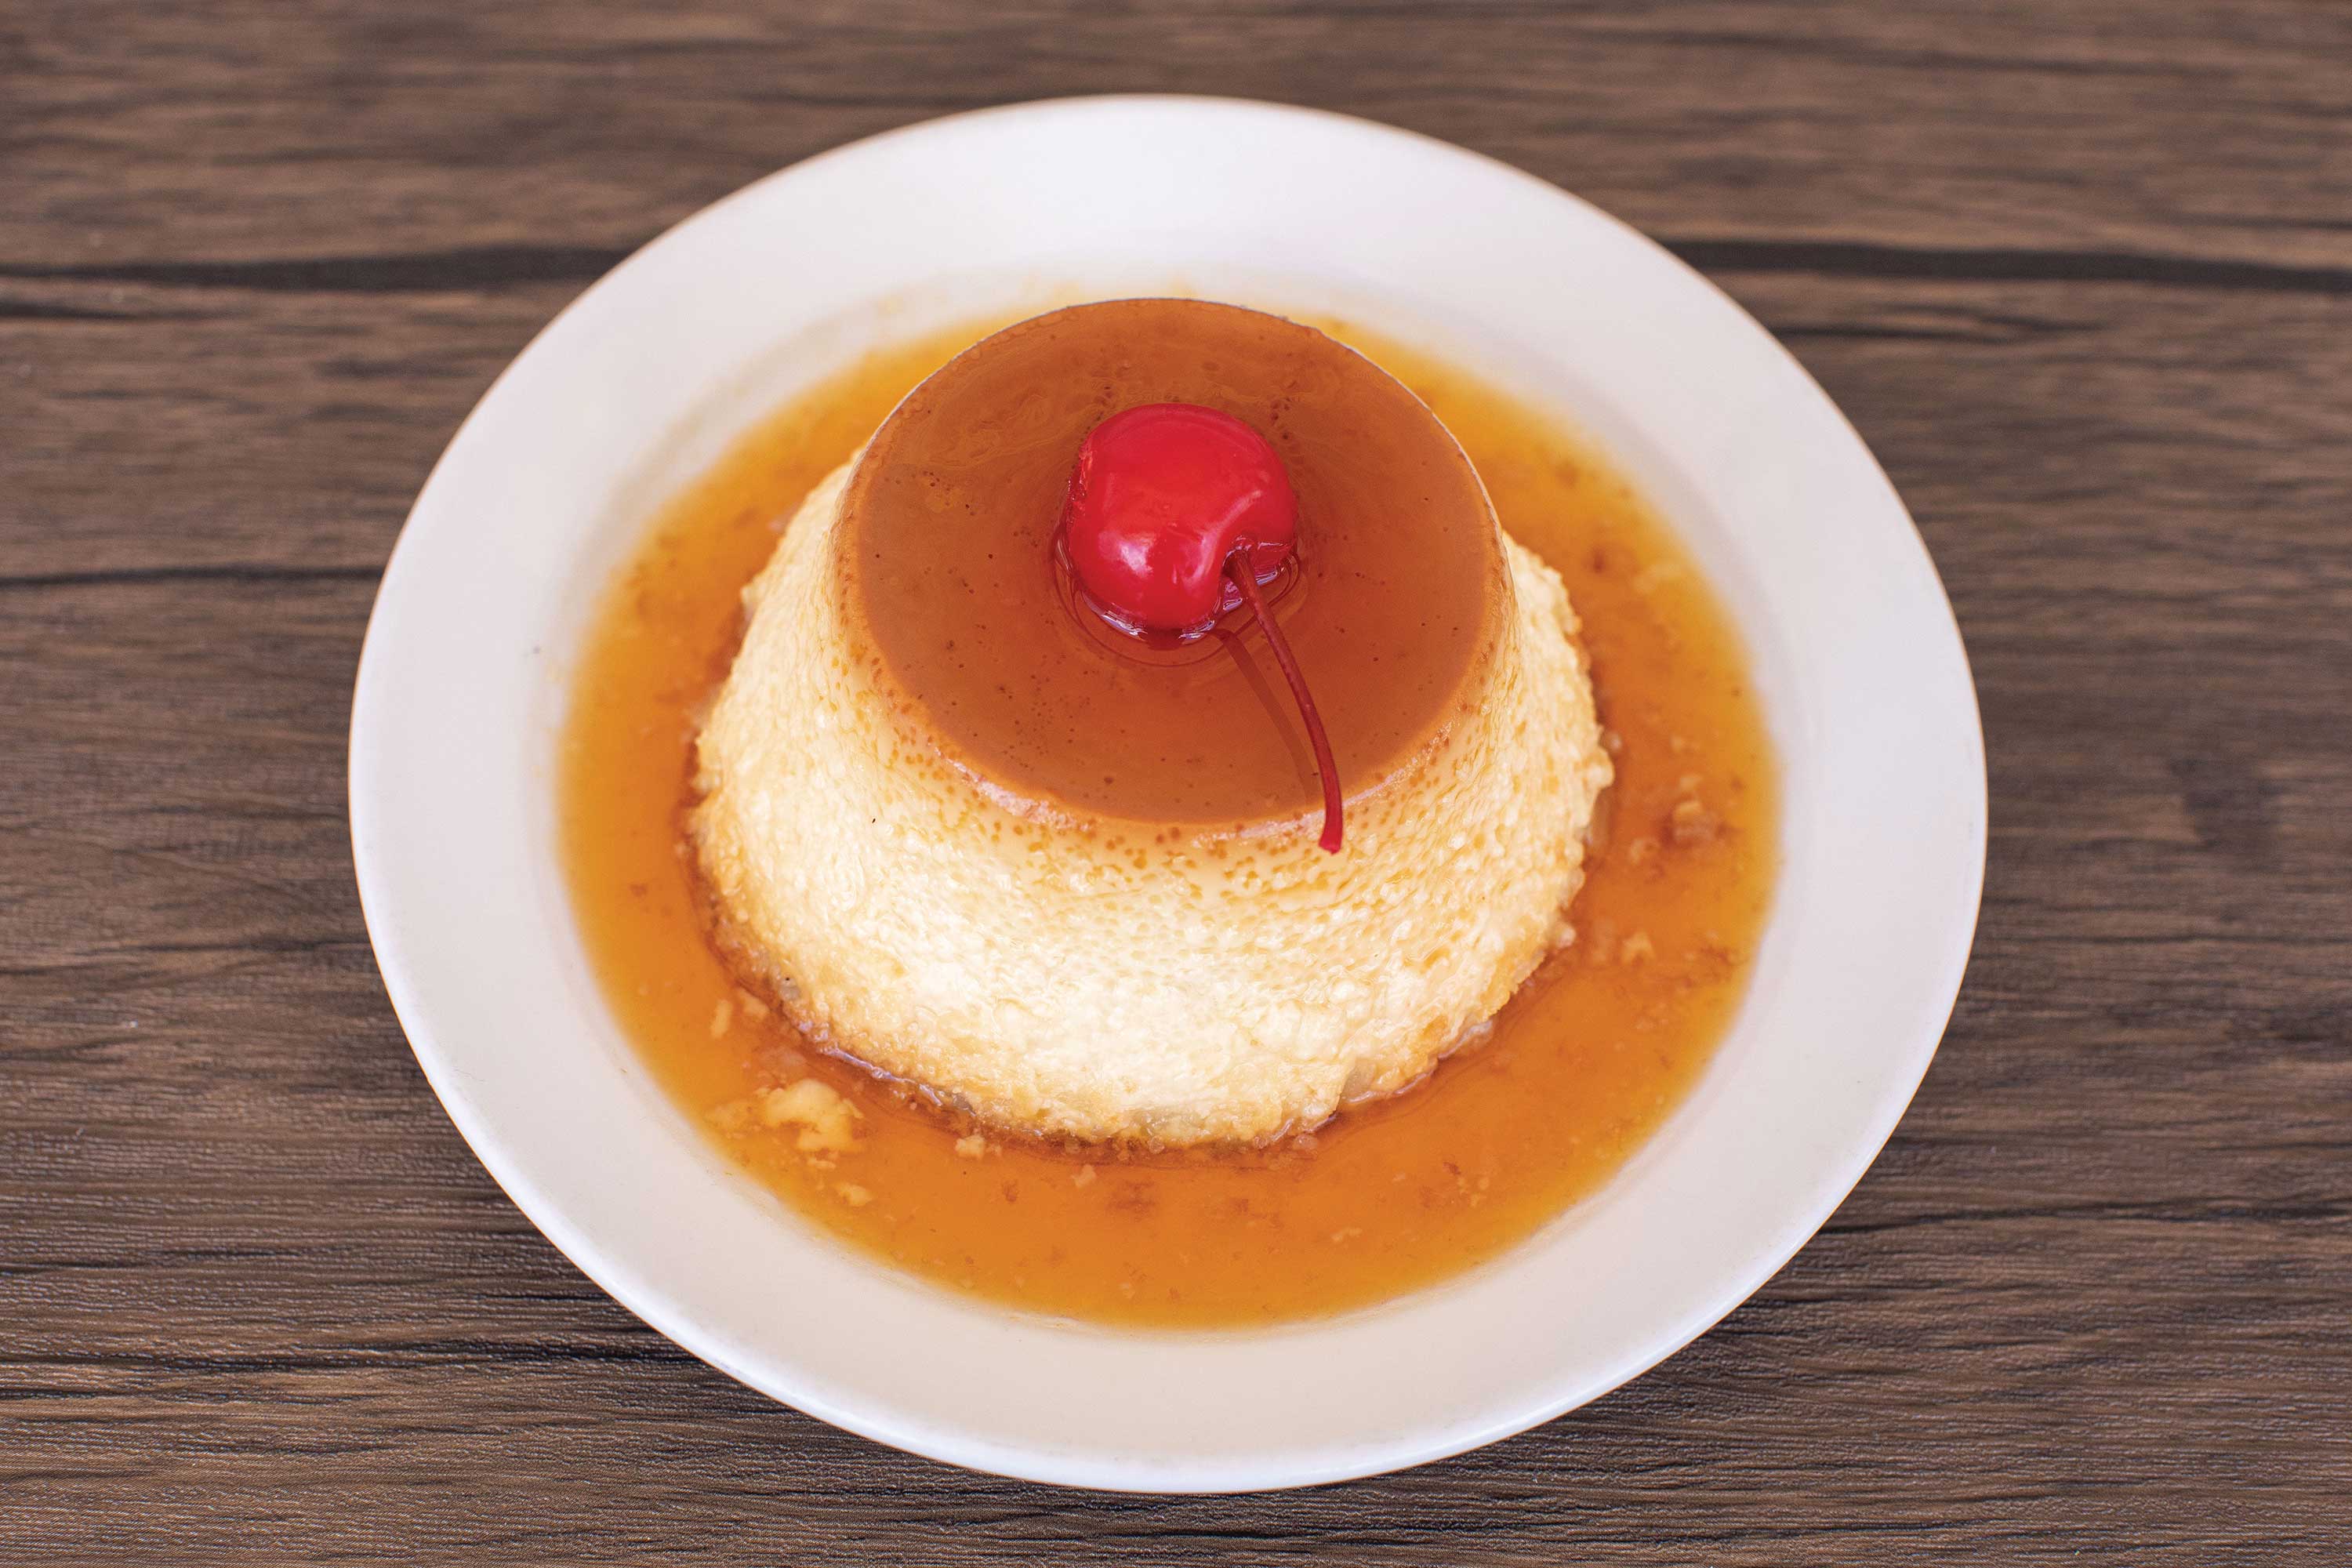 Image: A flan custard covered in a thin caramel sauce is served on a white plate. A cherry is set on top.